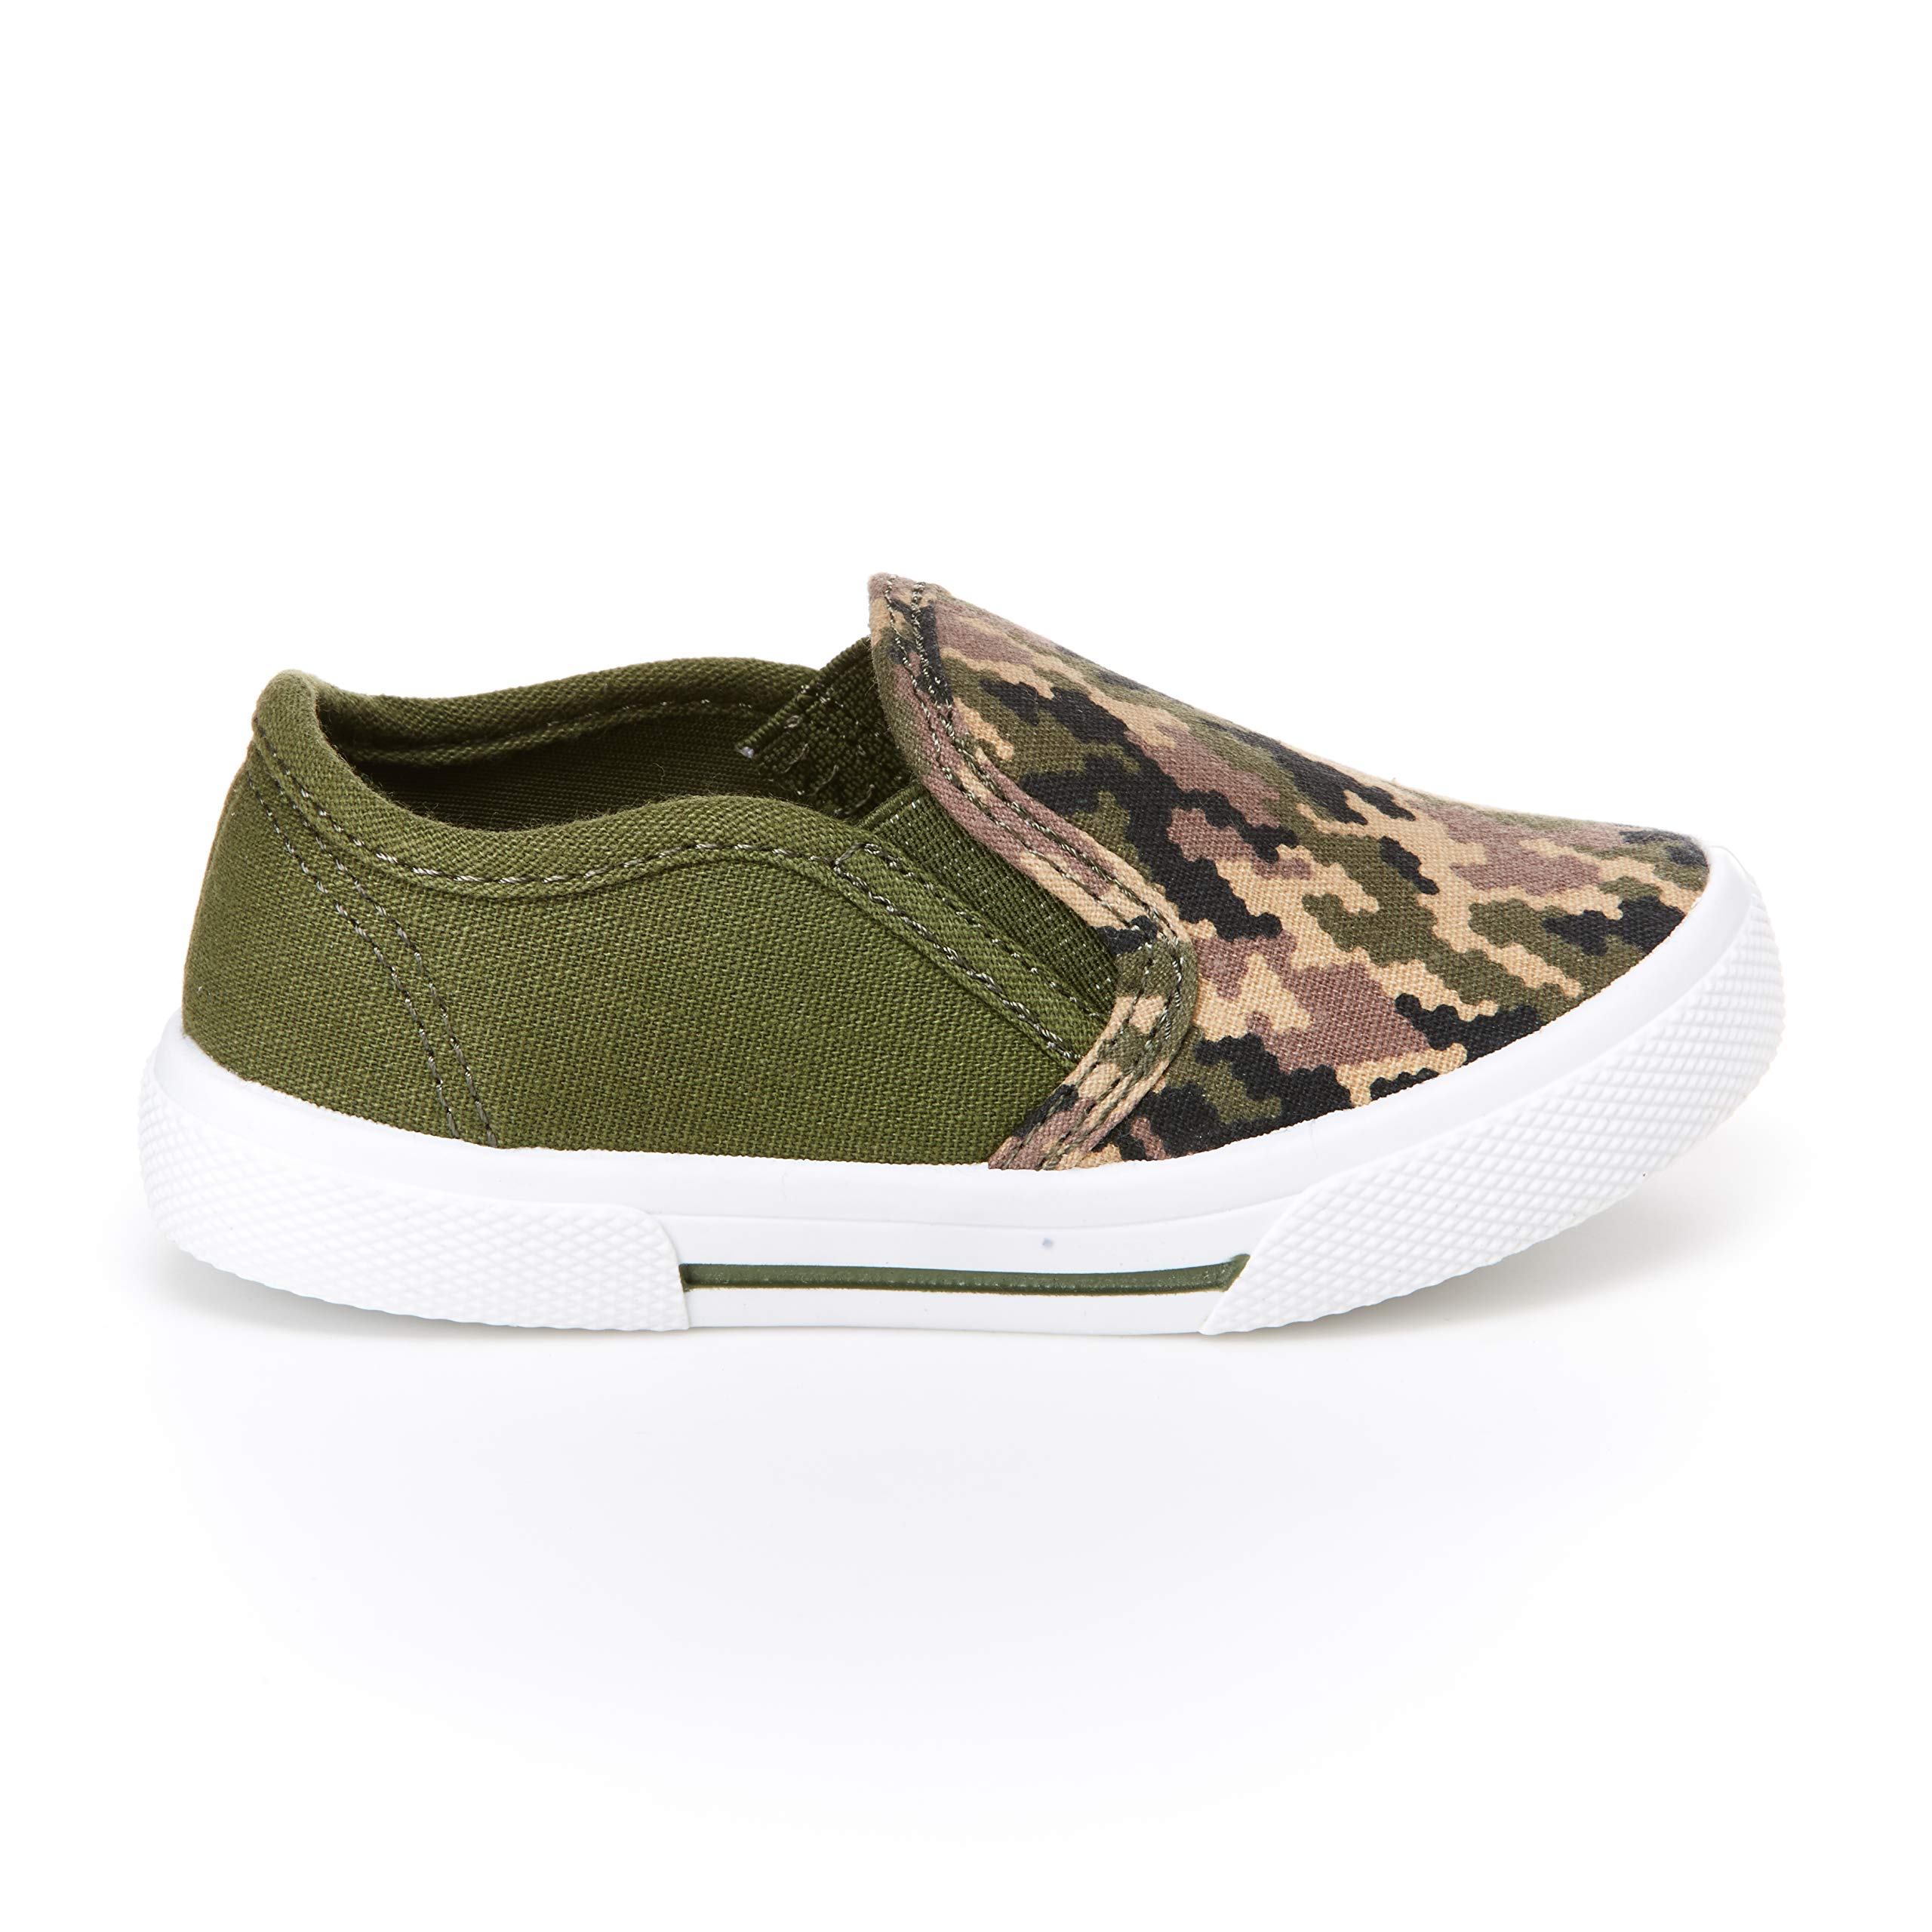 Simple Joys by Carter's Unisex Kids and Toddlers' Casual Slip-on Canvas Shoe